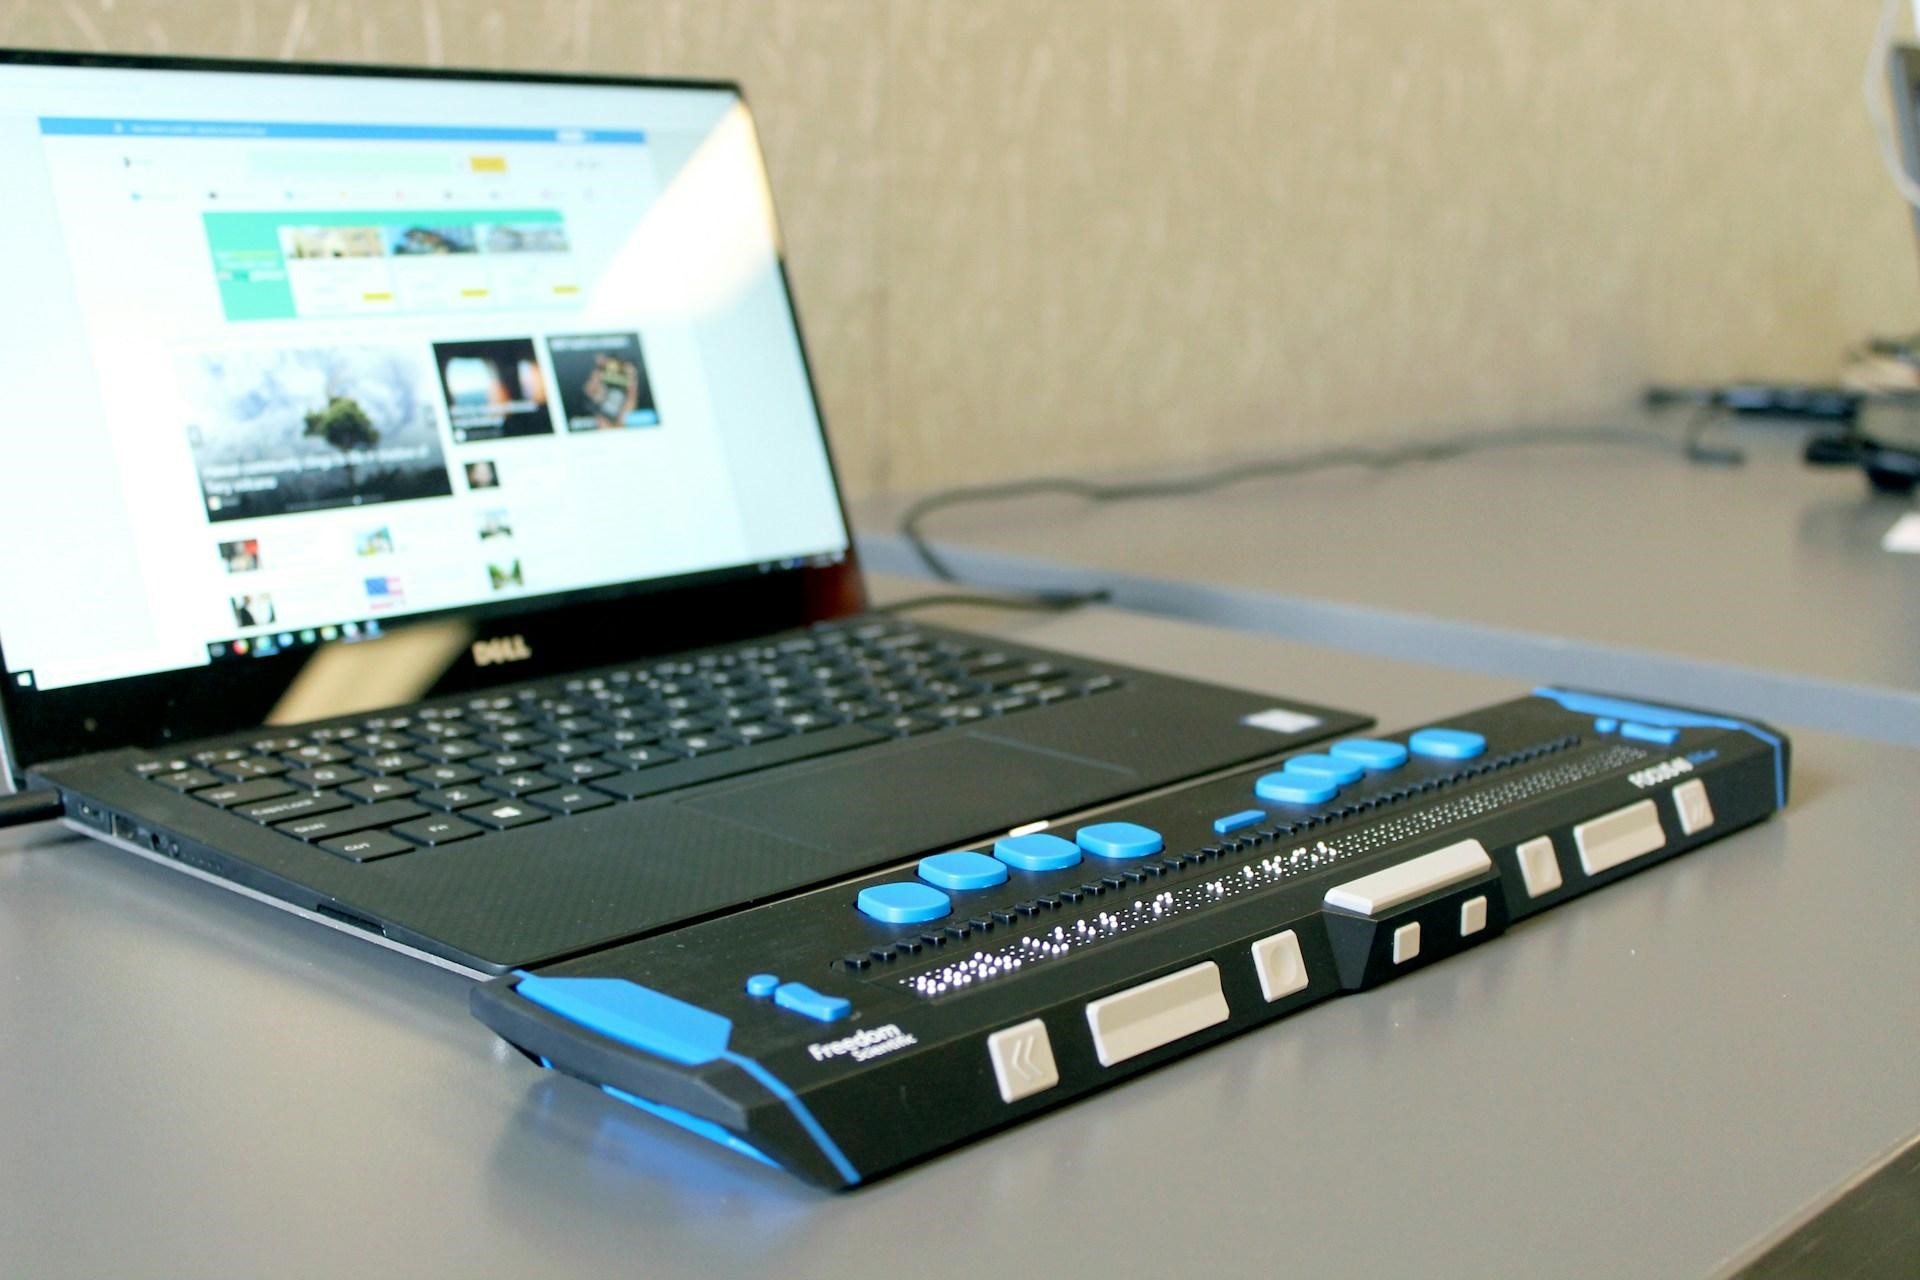 Image of a laptop showing way to explore online education through internet.